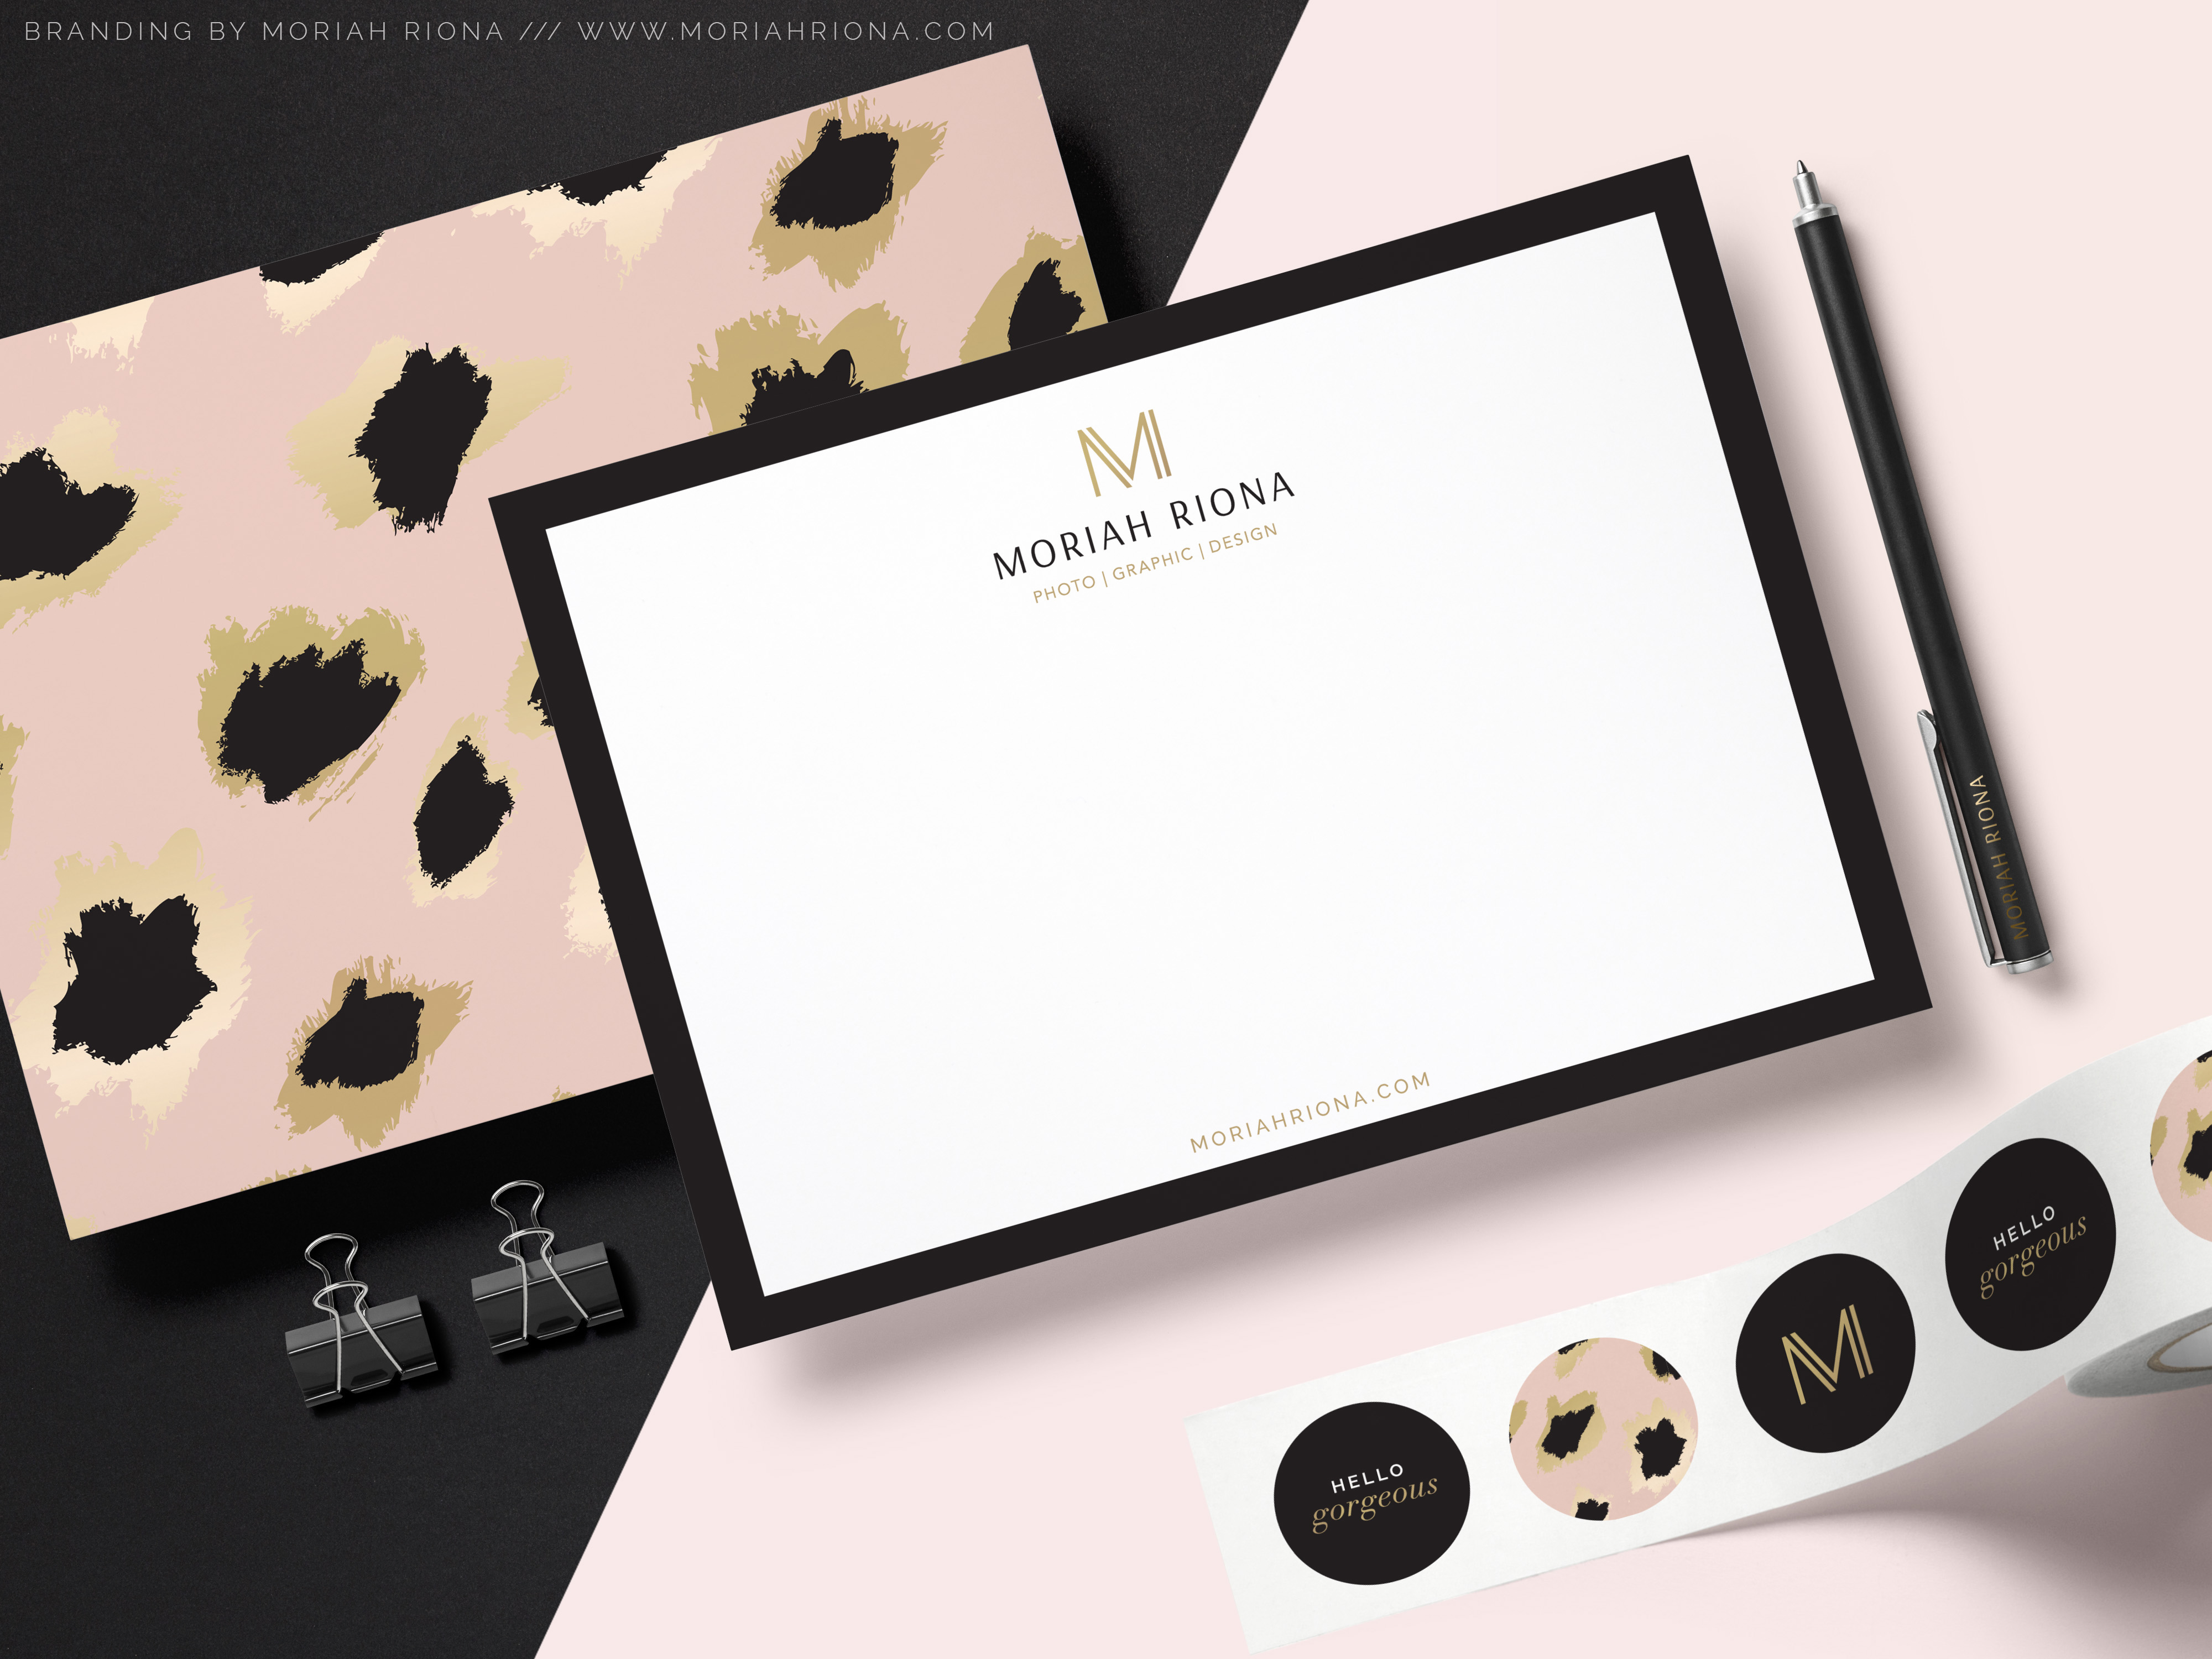 Luxe glam leopard print inspired branded stationery from Branding Collection by Moriah Riona. Graphic Design and Branding for photographers and creative bossladies.